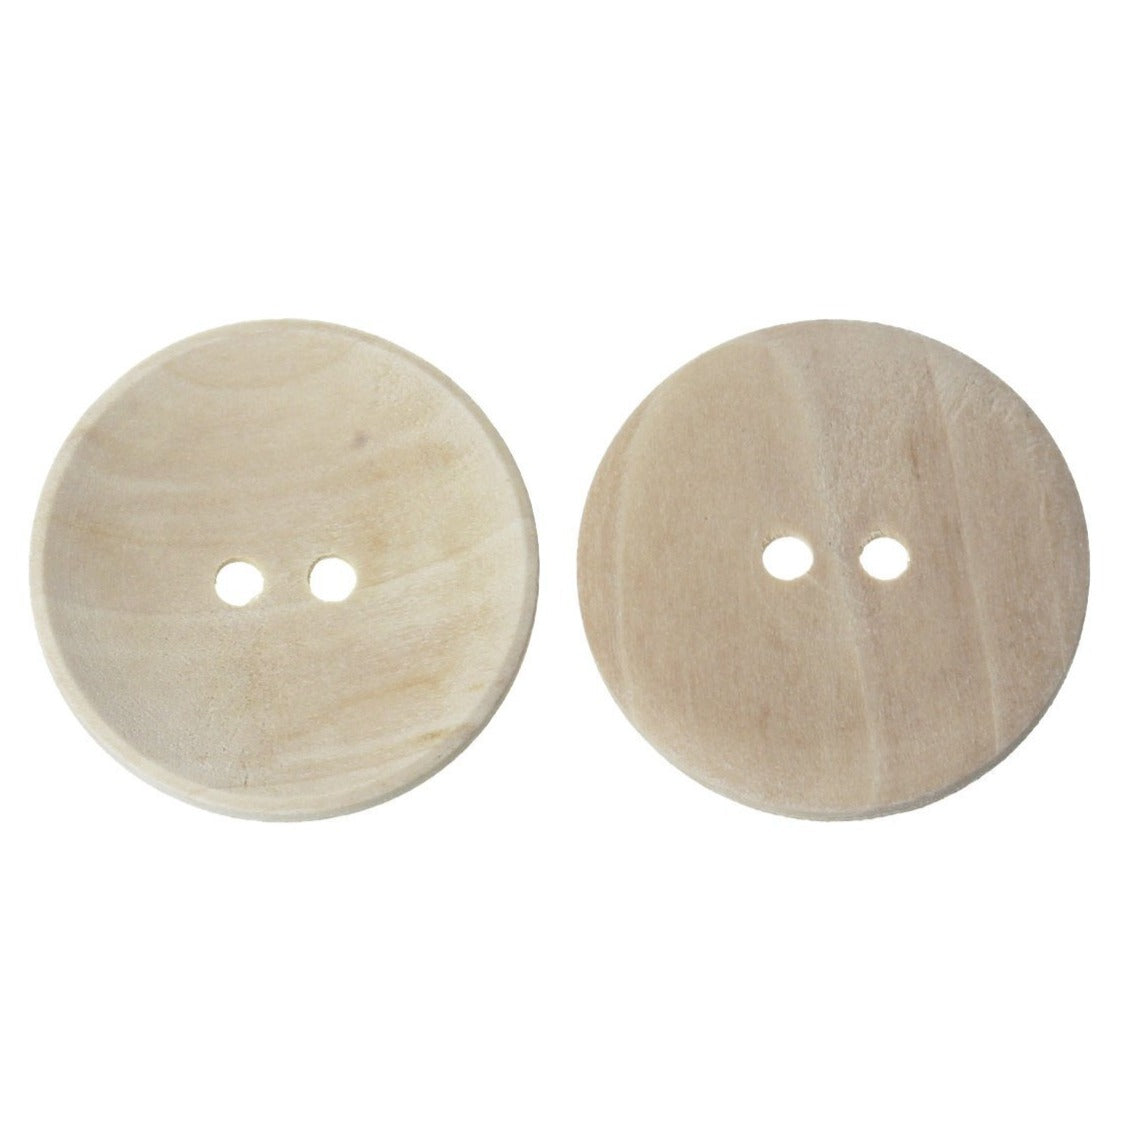 Unfinished wooden sewing buttons 20, 30, 35 or 40mm large buttons - set of 2